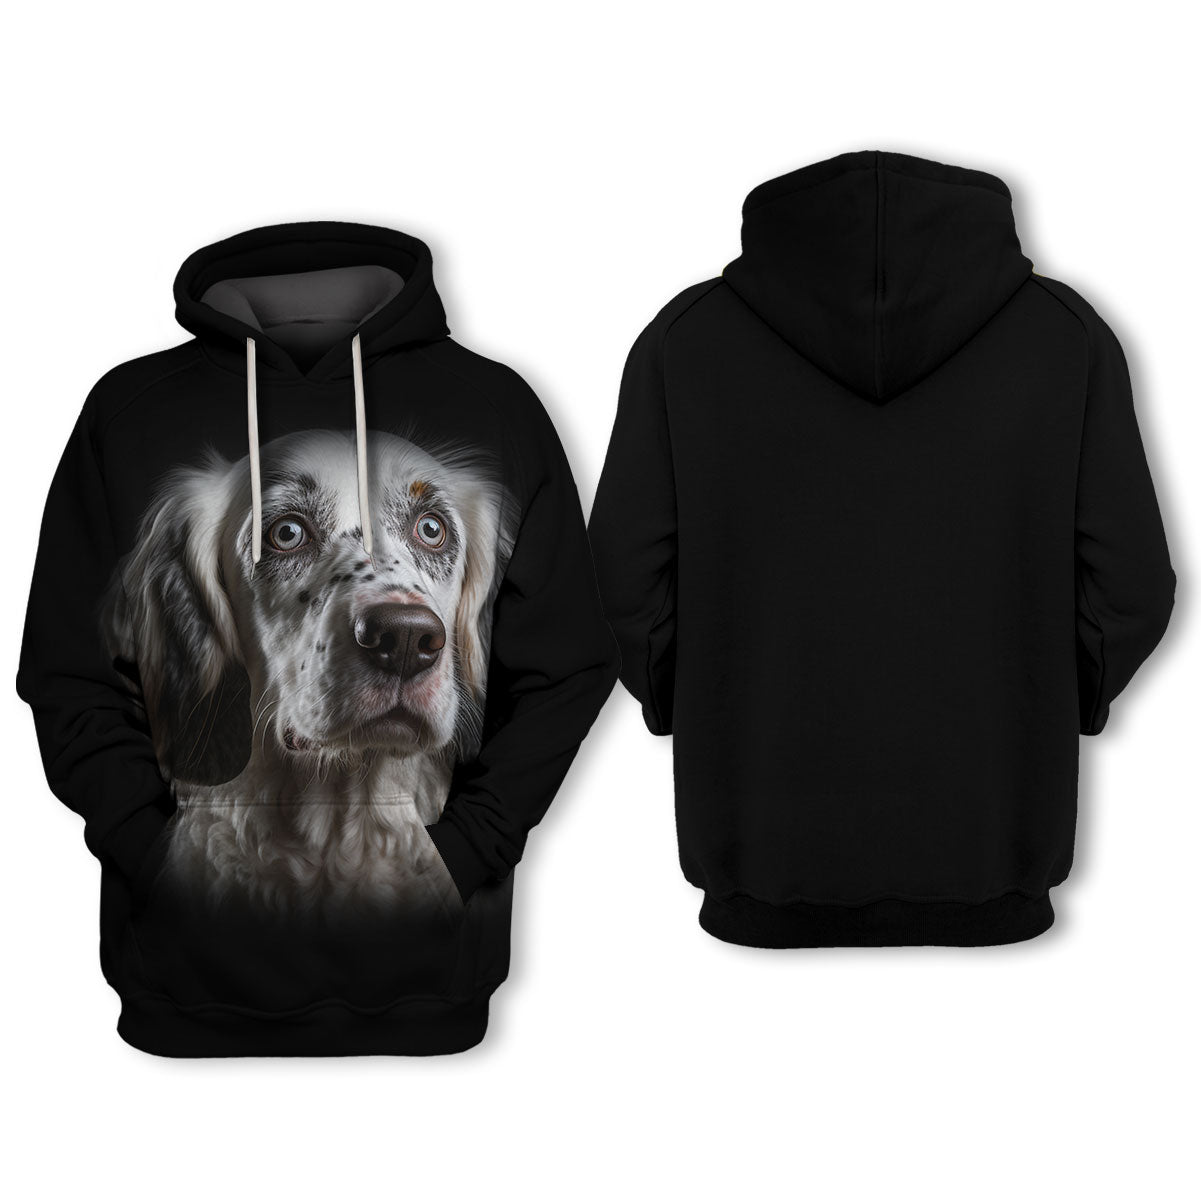 English Setter - Unisex 3D Graphic Hoodie